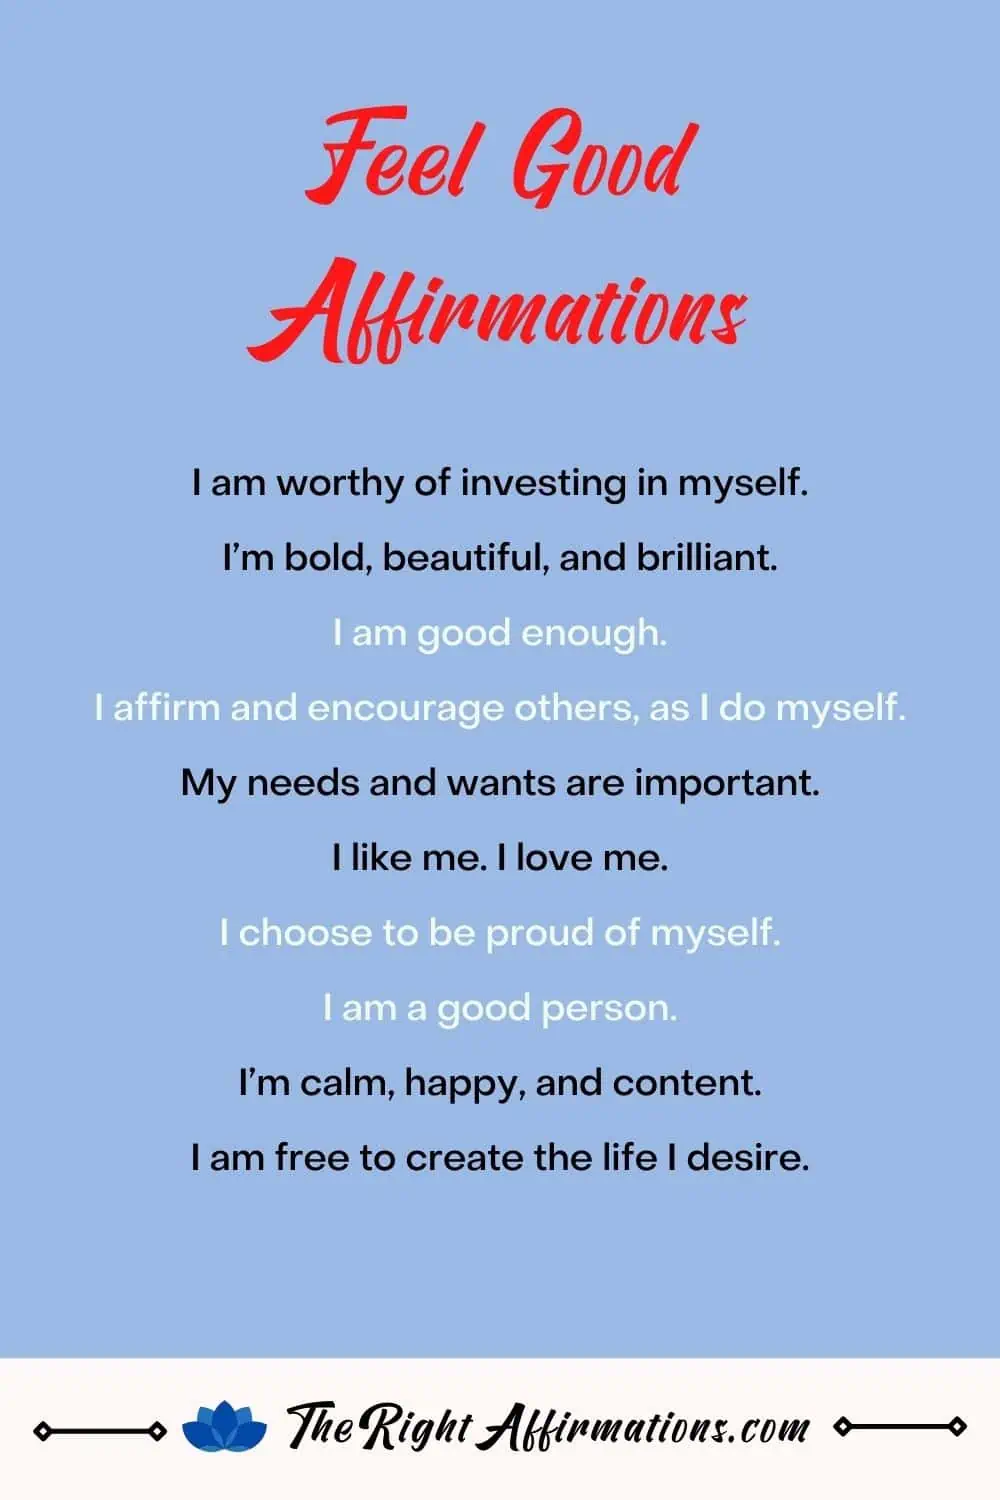 affirmations-to-fee-better-about-yourself